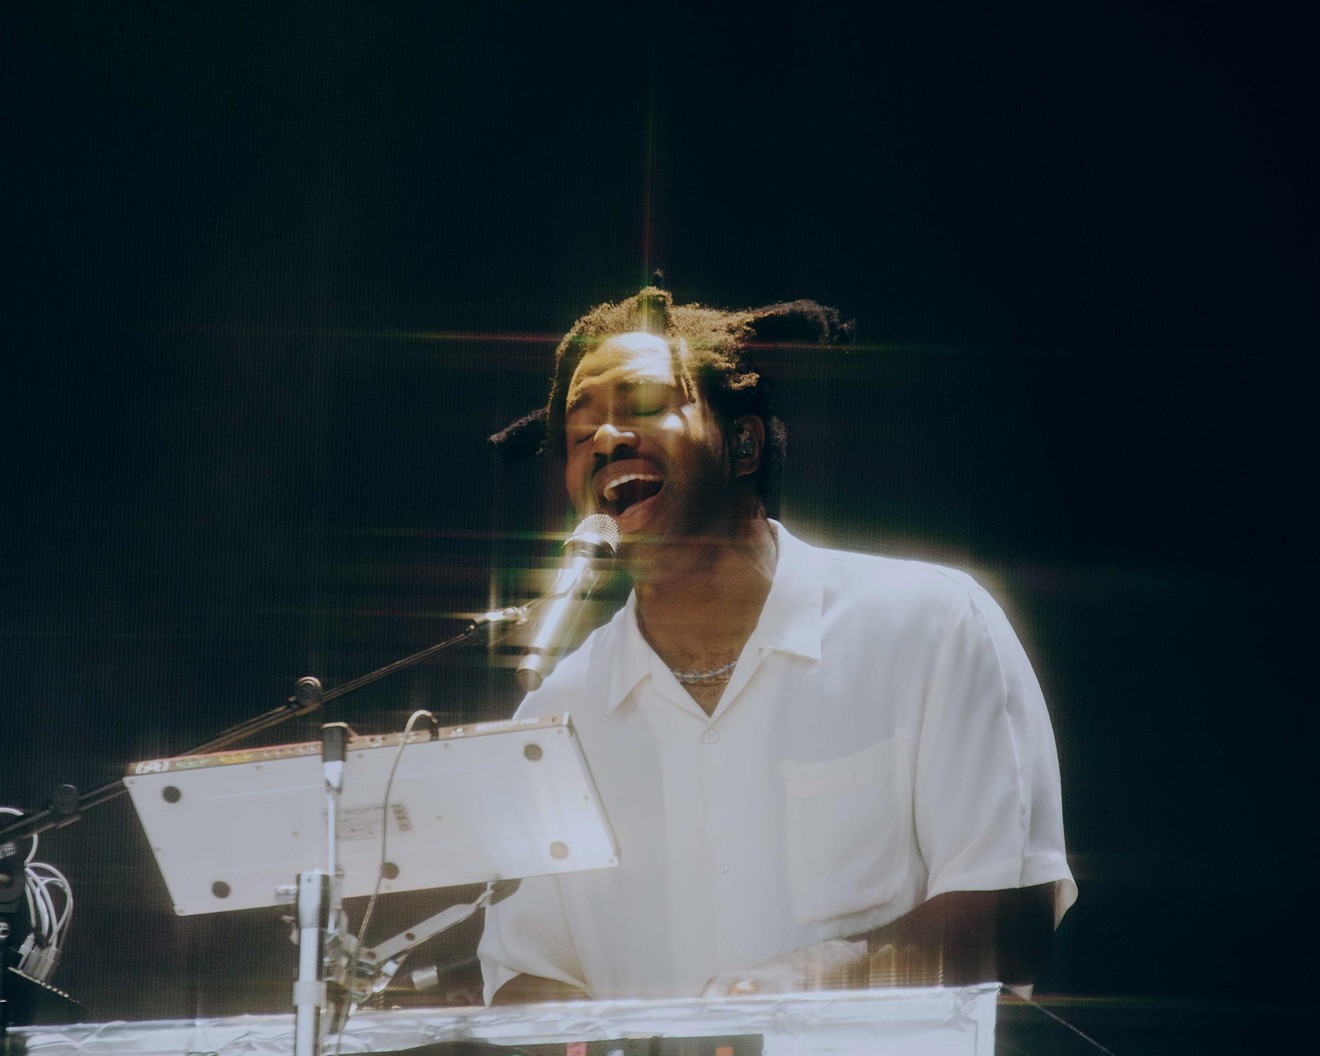 Sampha will perform live at the Miami Beach Bandshell on Tuesday, March 26.